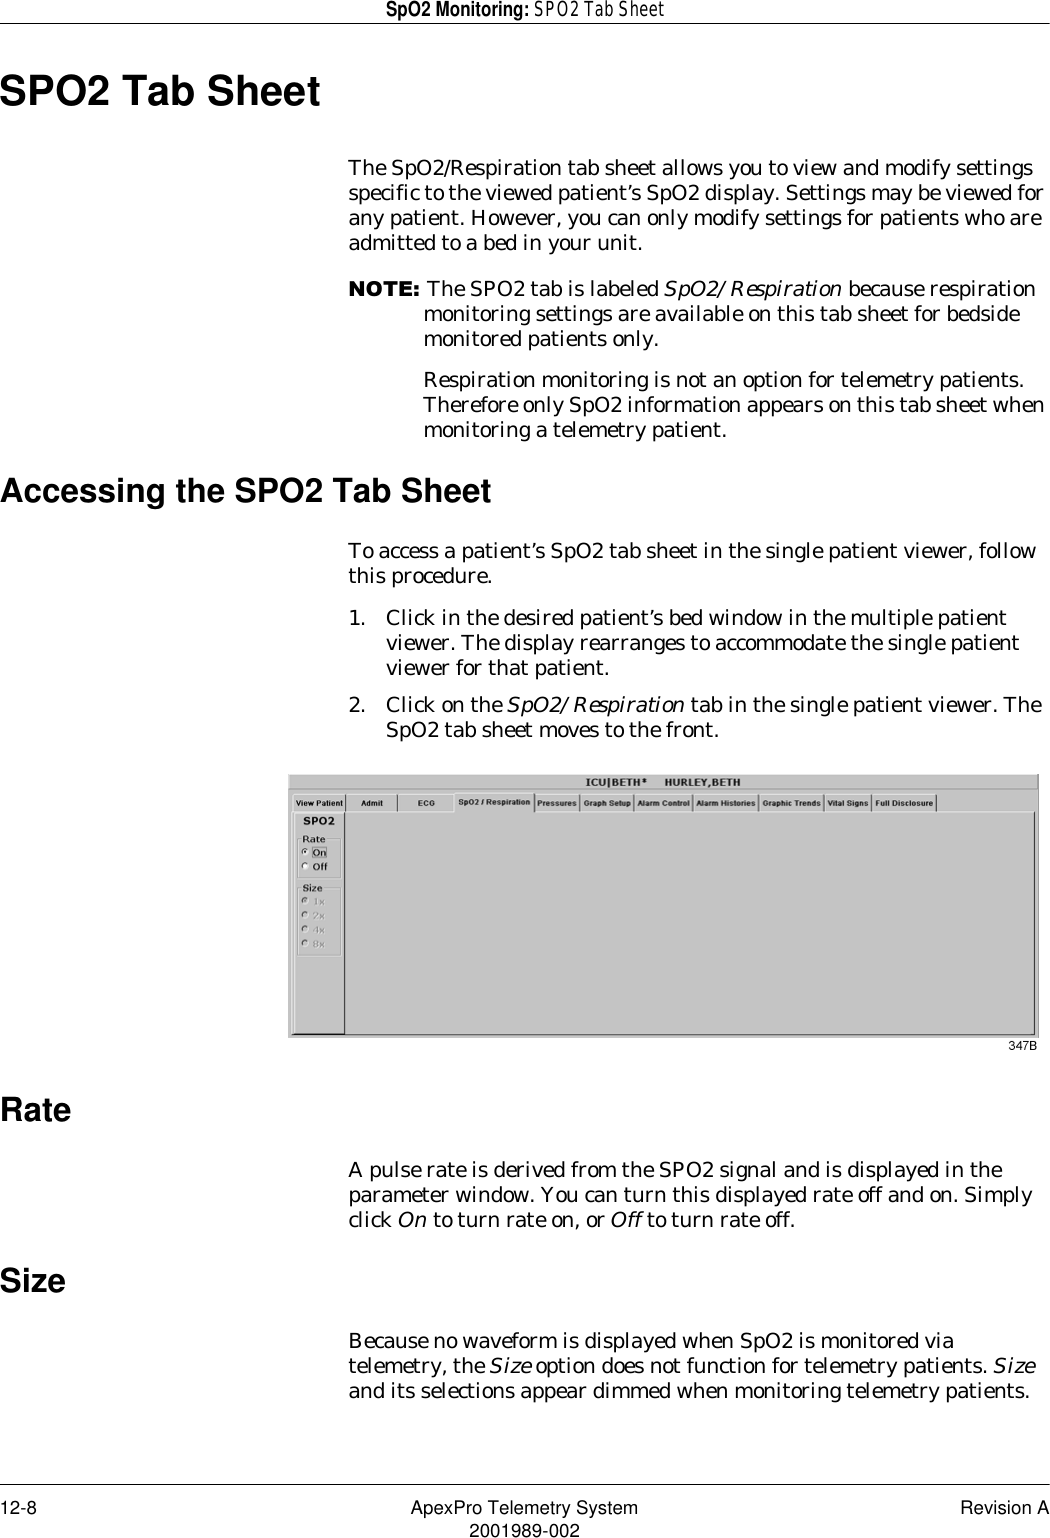 12-8 ApexPro Telemetry System Revision A2001989-002SpO2 Monitoring: SPO2 Tab SheetSPO2 Tab SheetThe SpO2/Respiration tab sheet allows you to view and modify settings specific to the viewed patient’s SpO2 display. Settings may be viewed for any patient. However, you can only modify settings for patients who are admitted to a bed in your unit.127(The SPO2 tab is labeled SpO2/Respiration because respiration monitoring settings are available on this tab sheet for bedside monitored patients only.Respiration monitoring is not an option for telemetry patients. Therefore only SpO2 information appears on this tab sheet when monitoring a telemetry patient.Accessing the SPO2 Tab SheetTo access a patient’s SpO2 tab sheet in the single patient viewer, follow this procedure.1. Click in the desired patient’s bed window in the multiple patient viewer. The display rearranges to accommodate the single patient viewer for that patient.2. Click on the SpO2/Respiration tab in the single patient viewer. The SpO2 tab sheet moves to the front.RateA pulse rate is derived from the SPO2 signal and is displayed in the parameter window. You can turn this displayed rate off and on. Simply click On to turn rate on, or Off to turn rate off.SizeBecause no waveform is displayed when SpO2 is monitored via telemetry, the Size option does not function for telemetry patients. Size and its selections appear dimmed when monitoring telemetry patients.